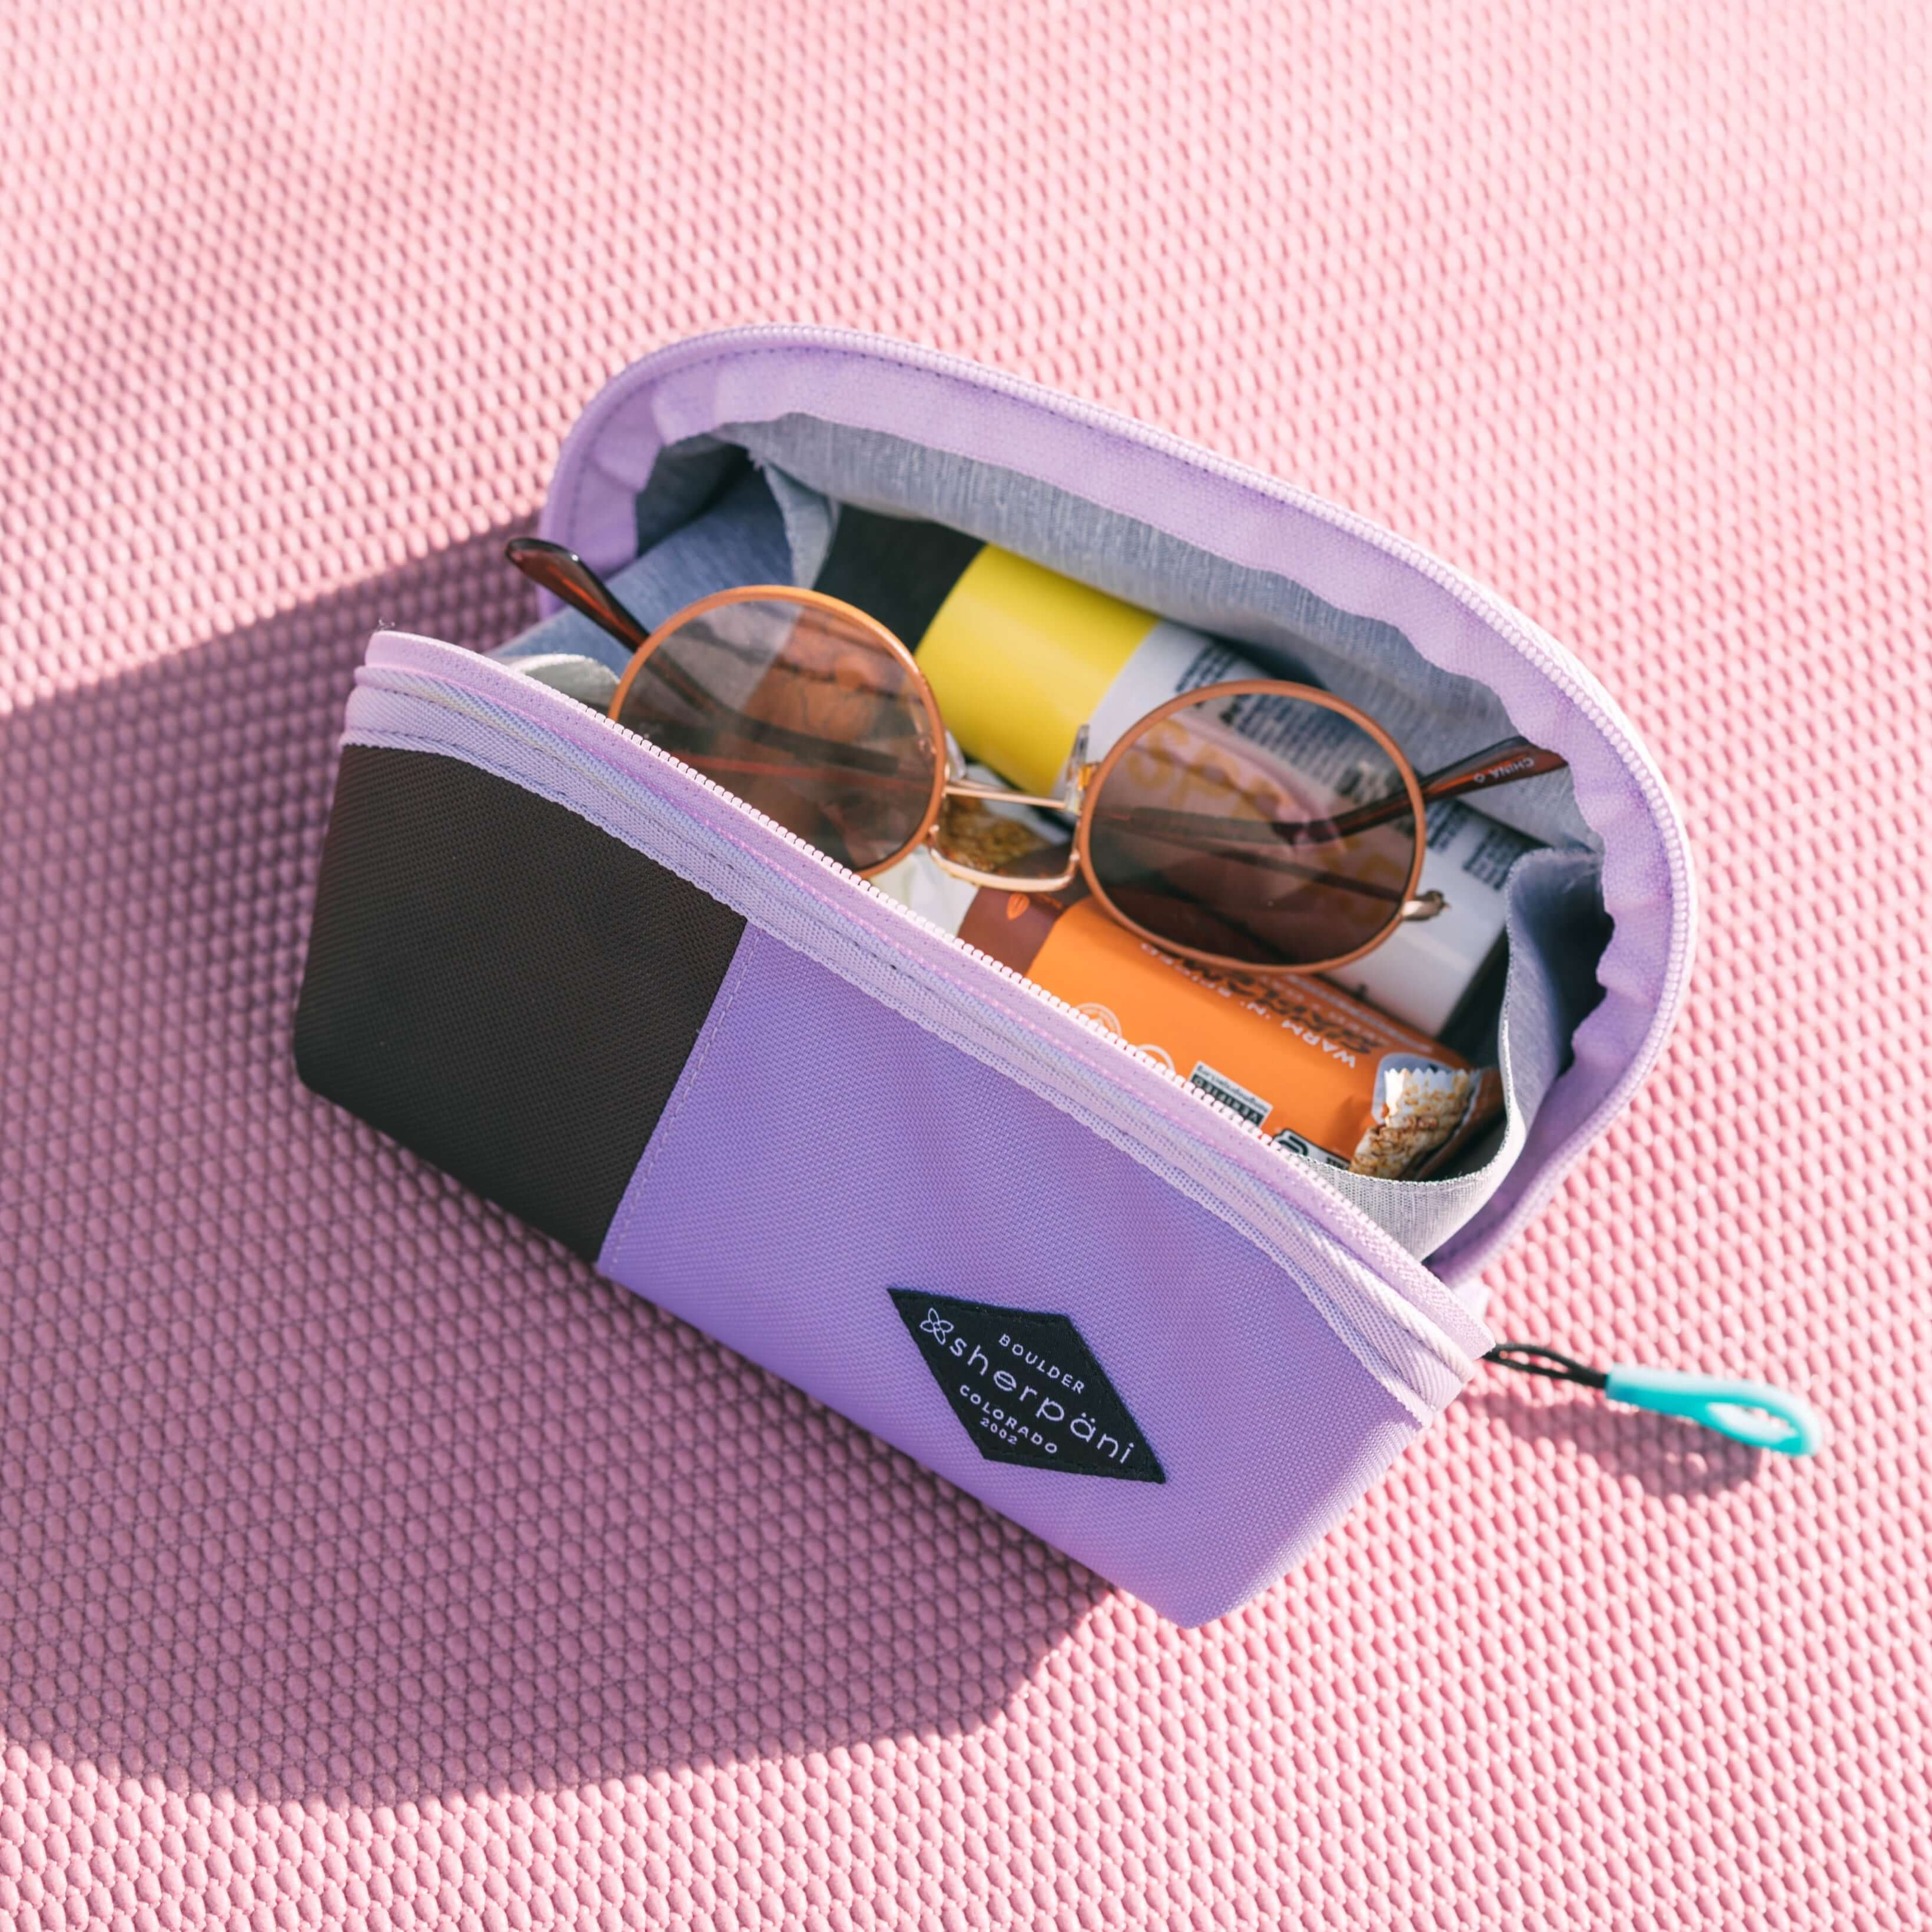 Top view of Sherpani travel accessory, the Harmony in Lavender. The pouch is open to reveal several items: sunglasses, granola bar and sunscreen. 